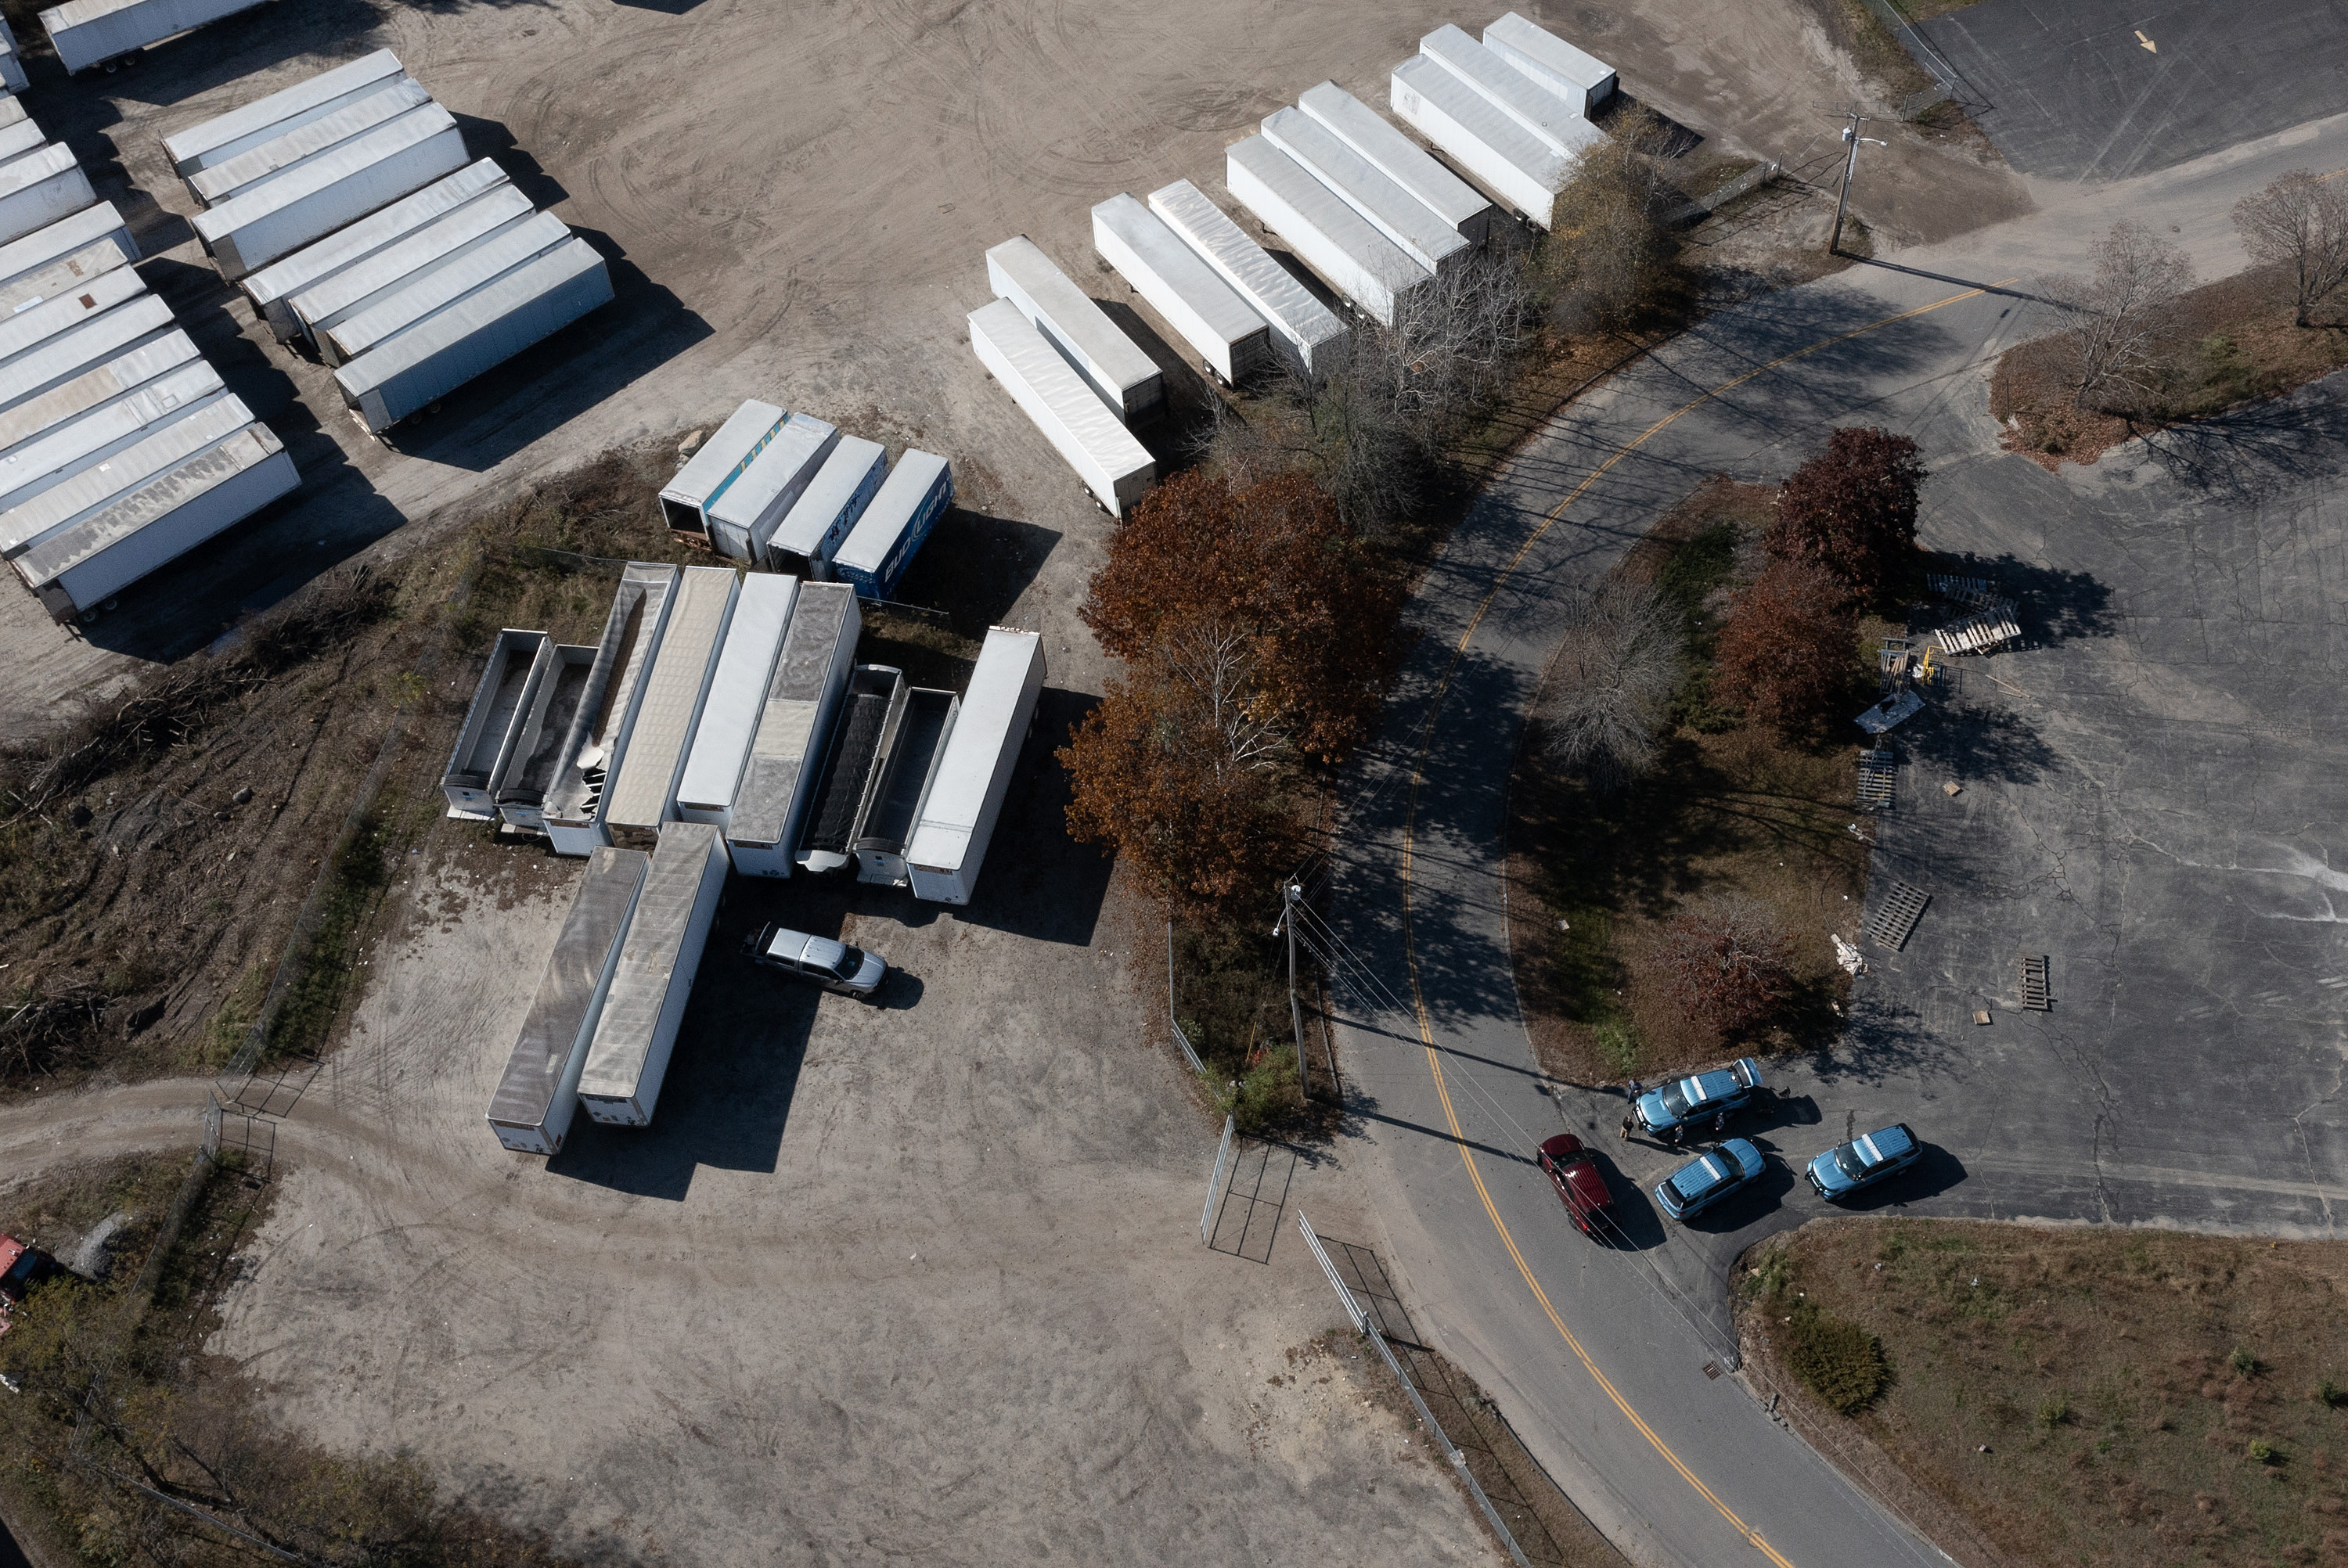 In an aerial view, law enforcement officials are seen investigating the area where Robert Card, the suspect in two mass killings, was found dead on October 28 in Lisbon, Maine.